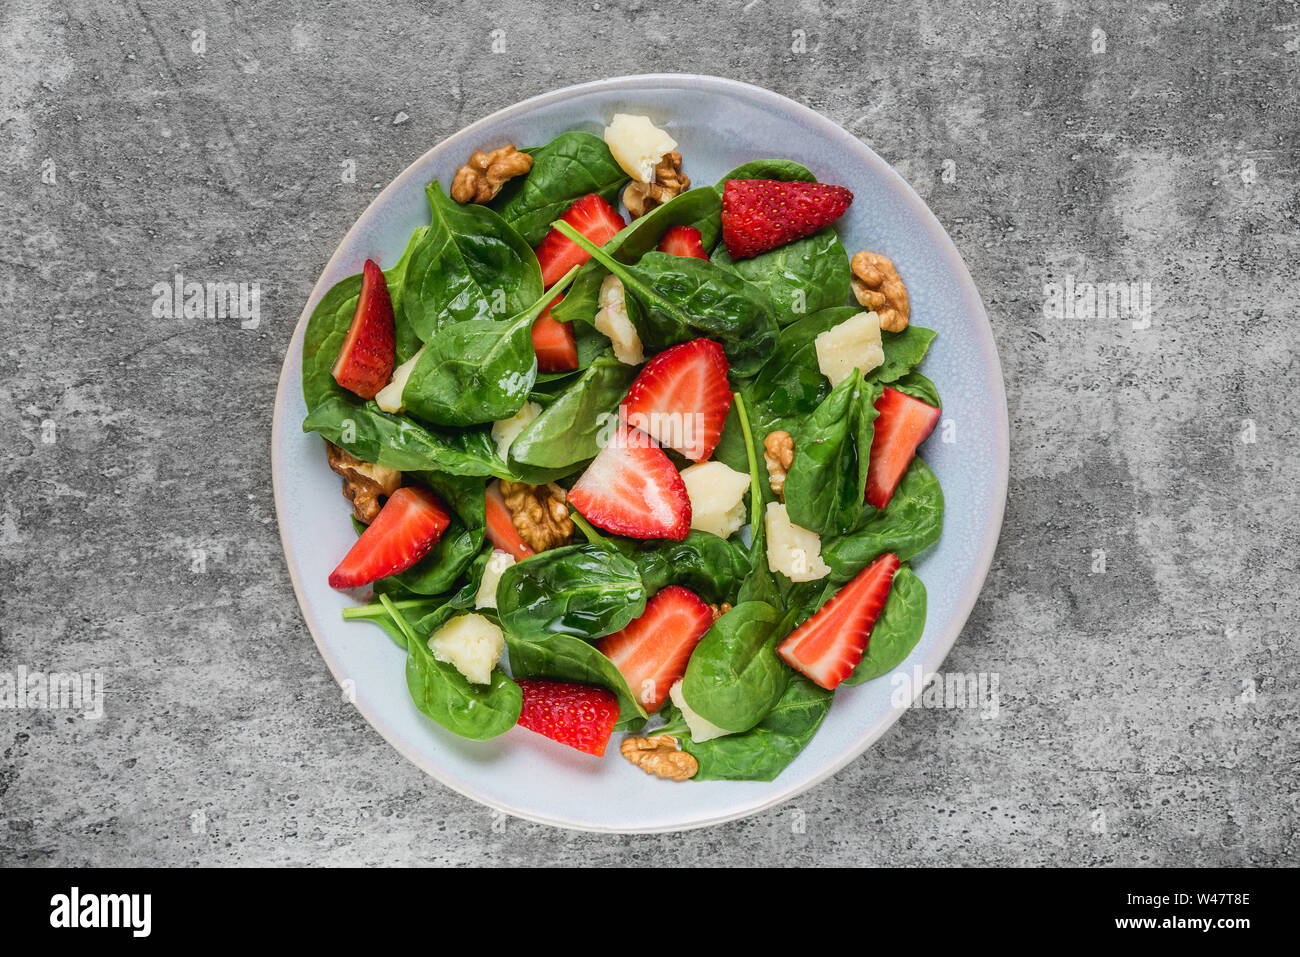 salad with strawberry, spinach leaves, parmesan cheese and walnuts on concrete background. healthy diet food. top view Stock Photo